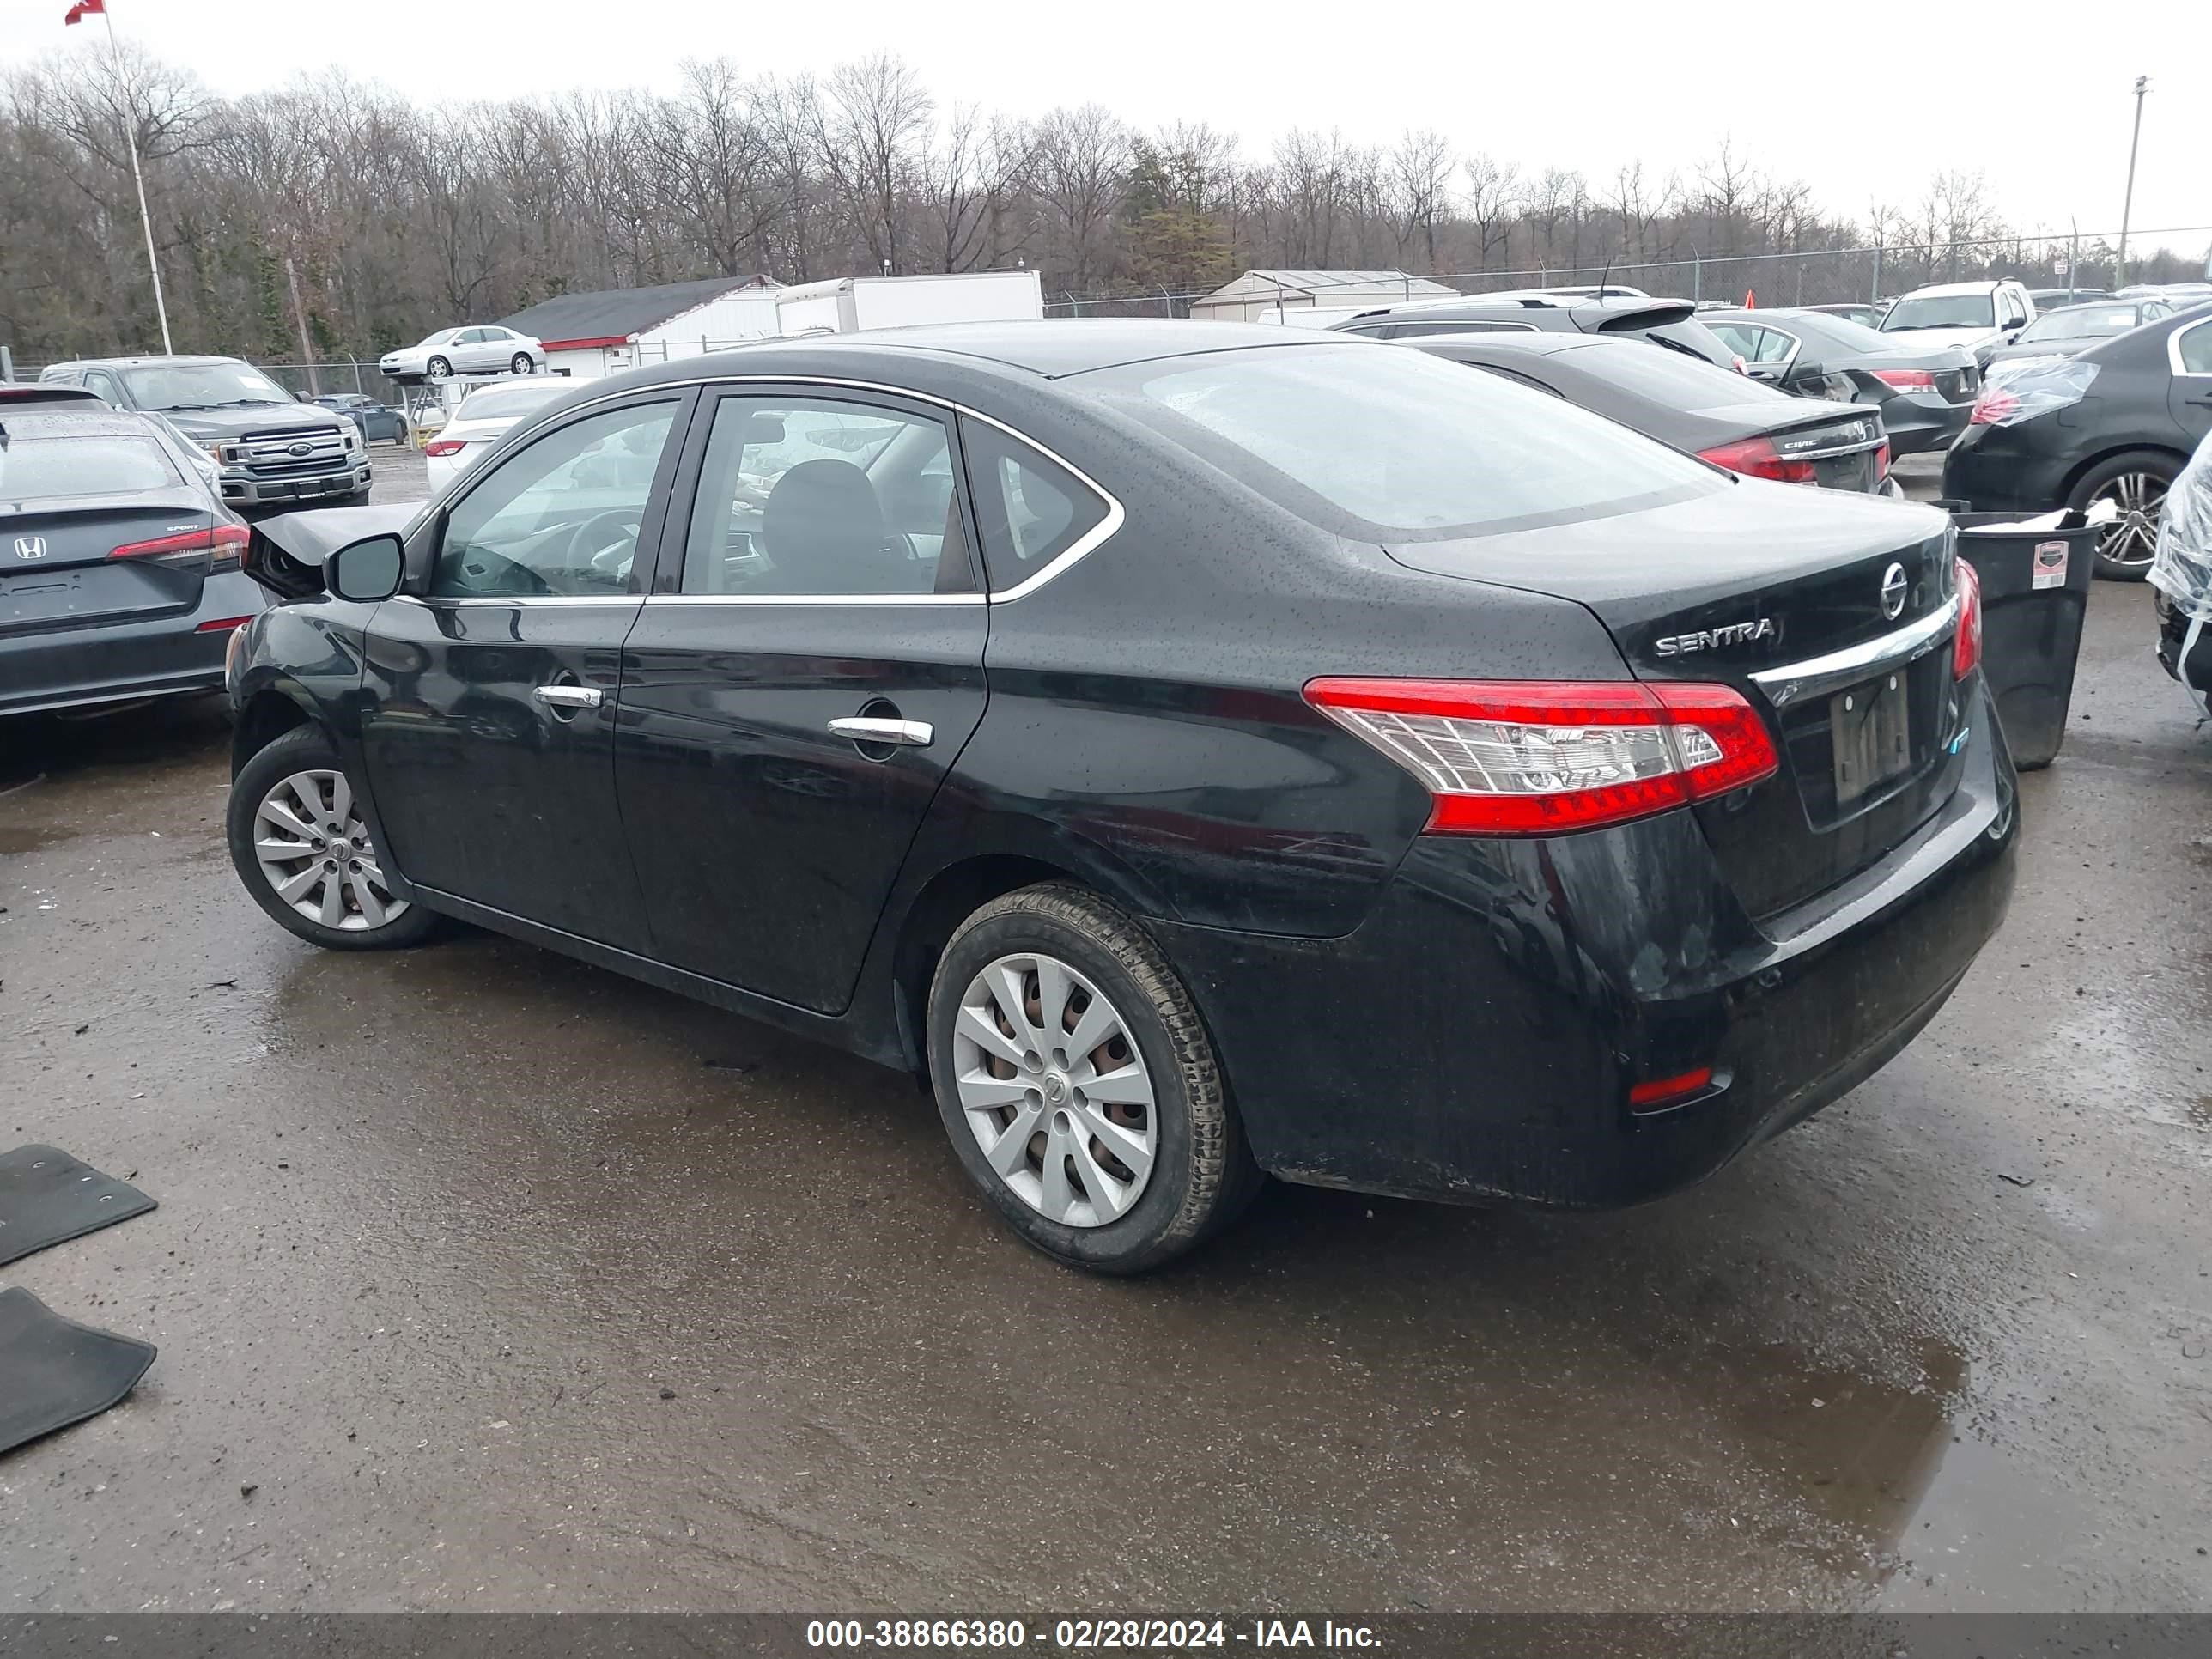 2014 Nissan Sentra S vin: 3N1AB7APXEY245326